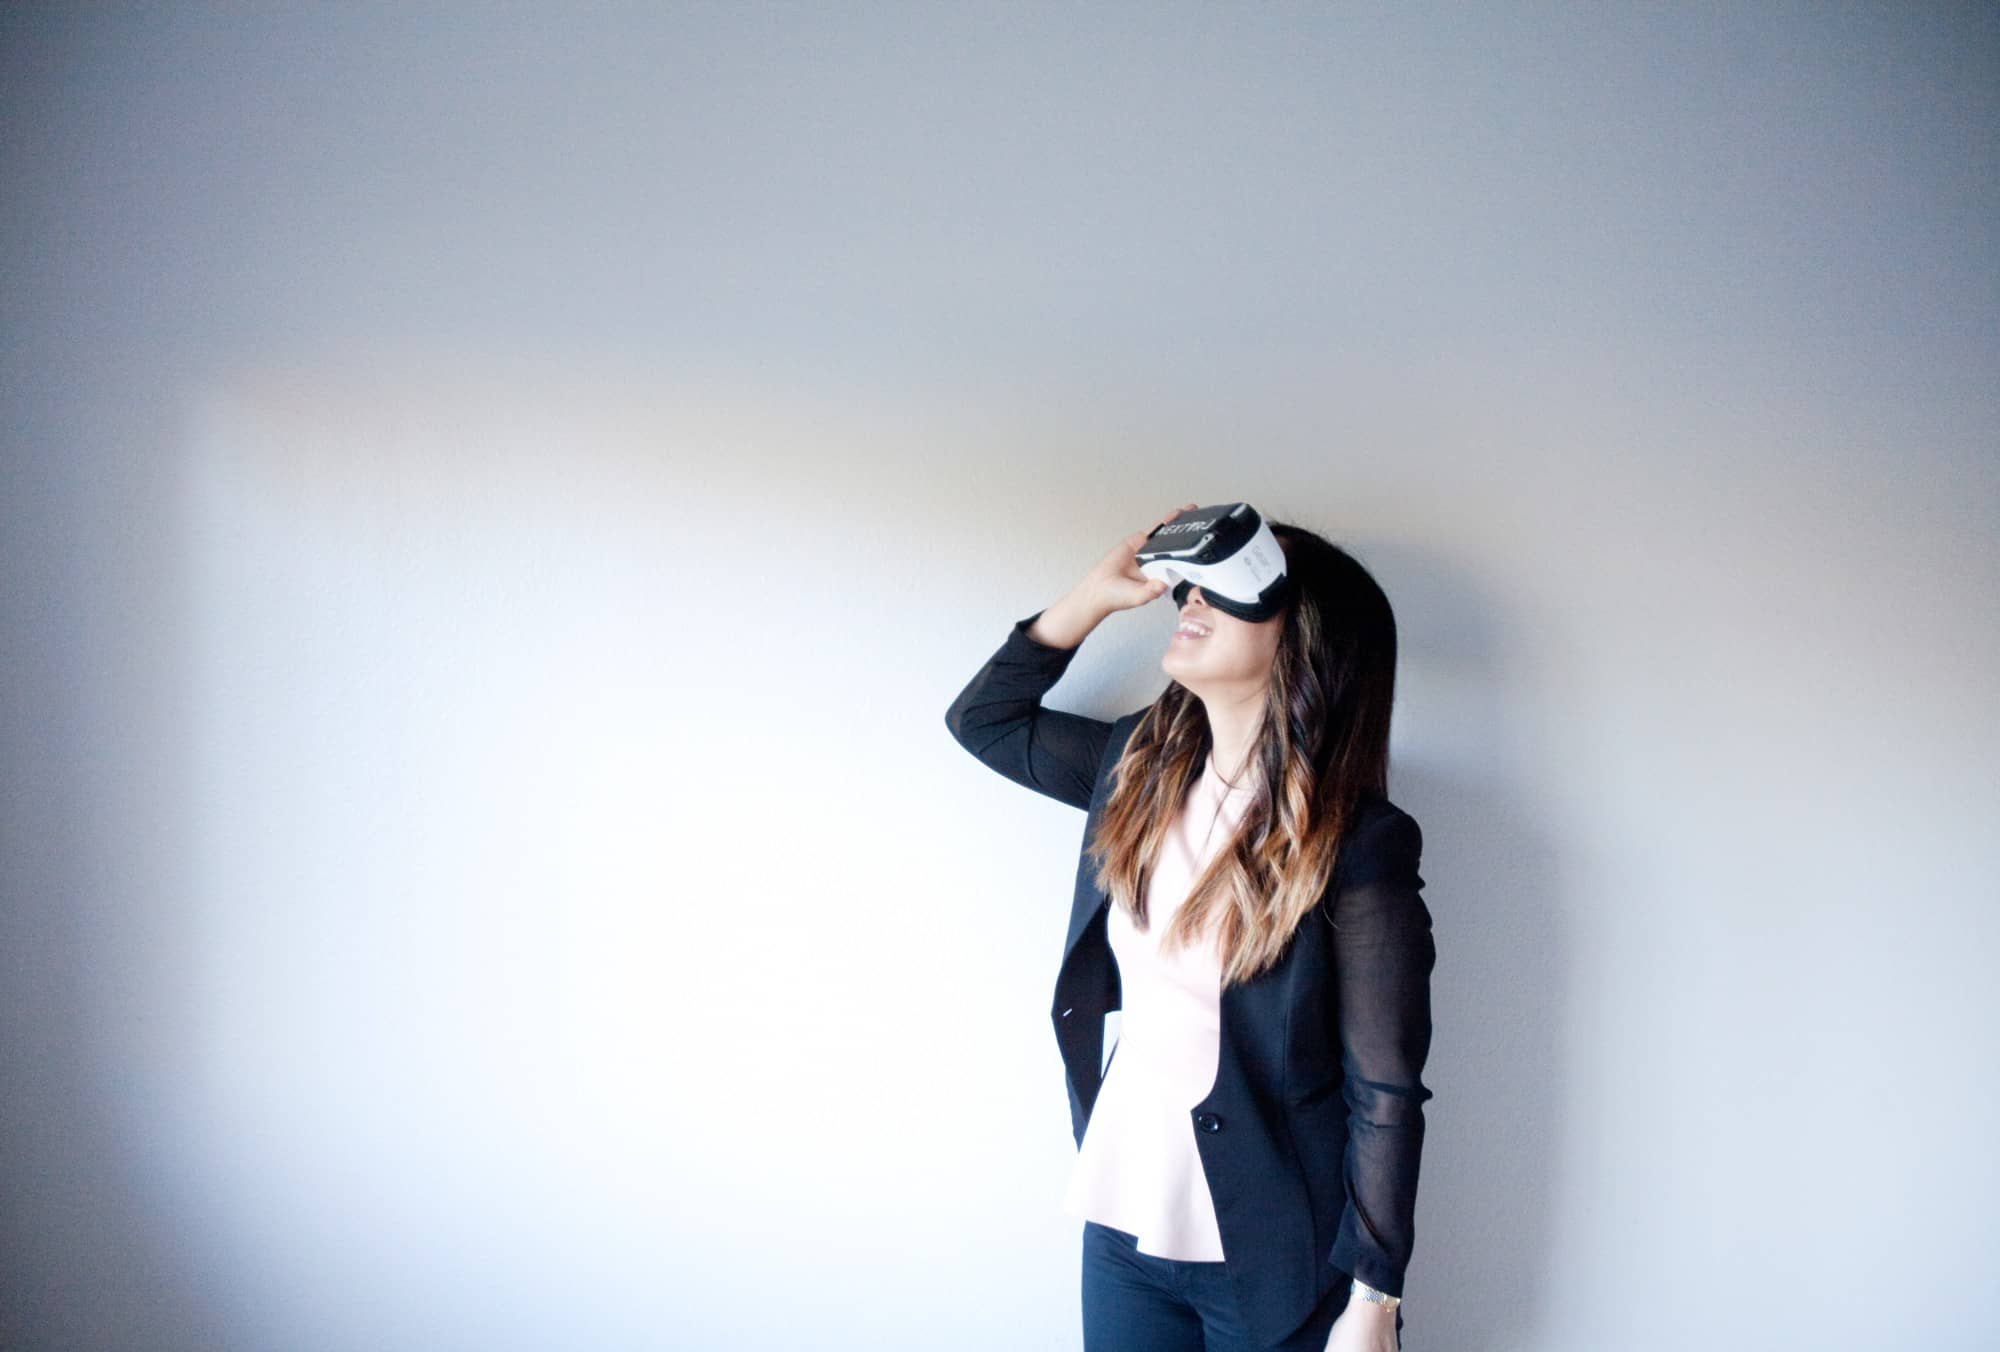 5 Ways Companies Have Used VR for Marketing